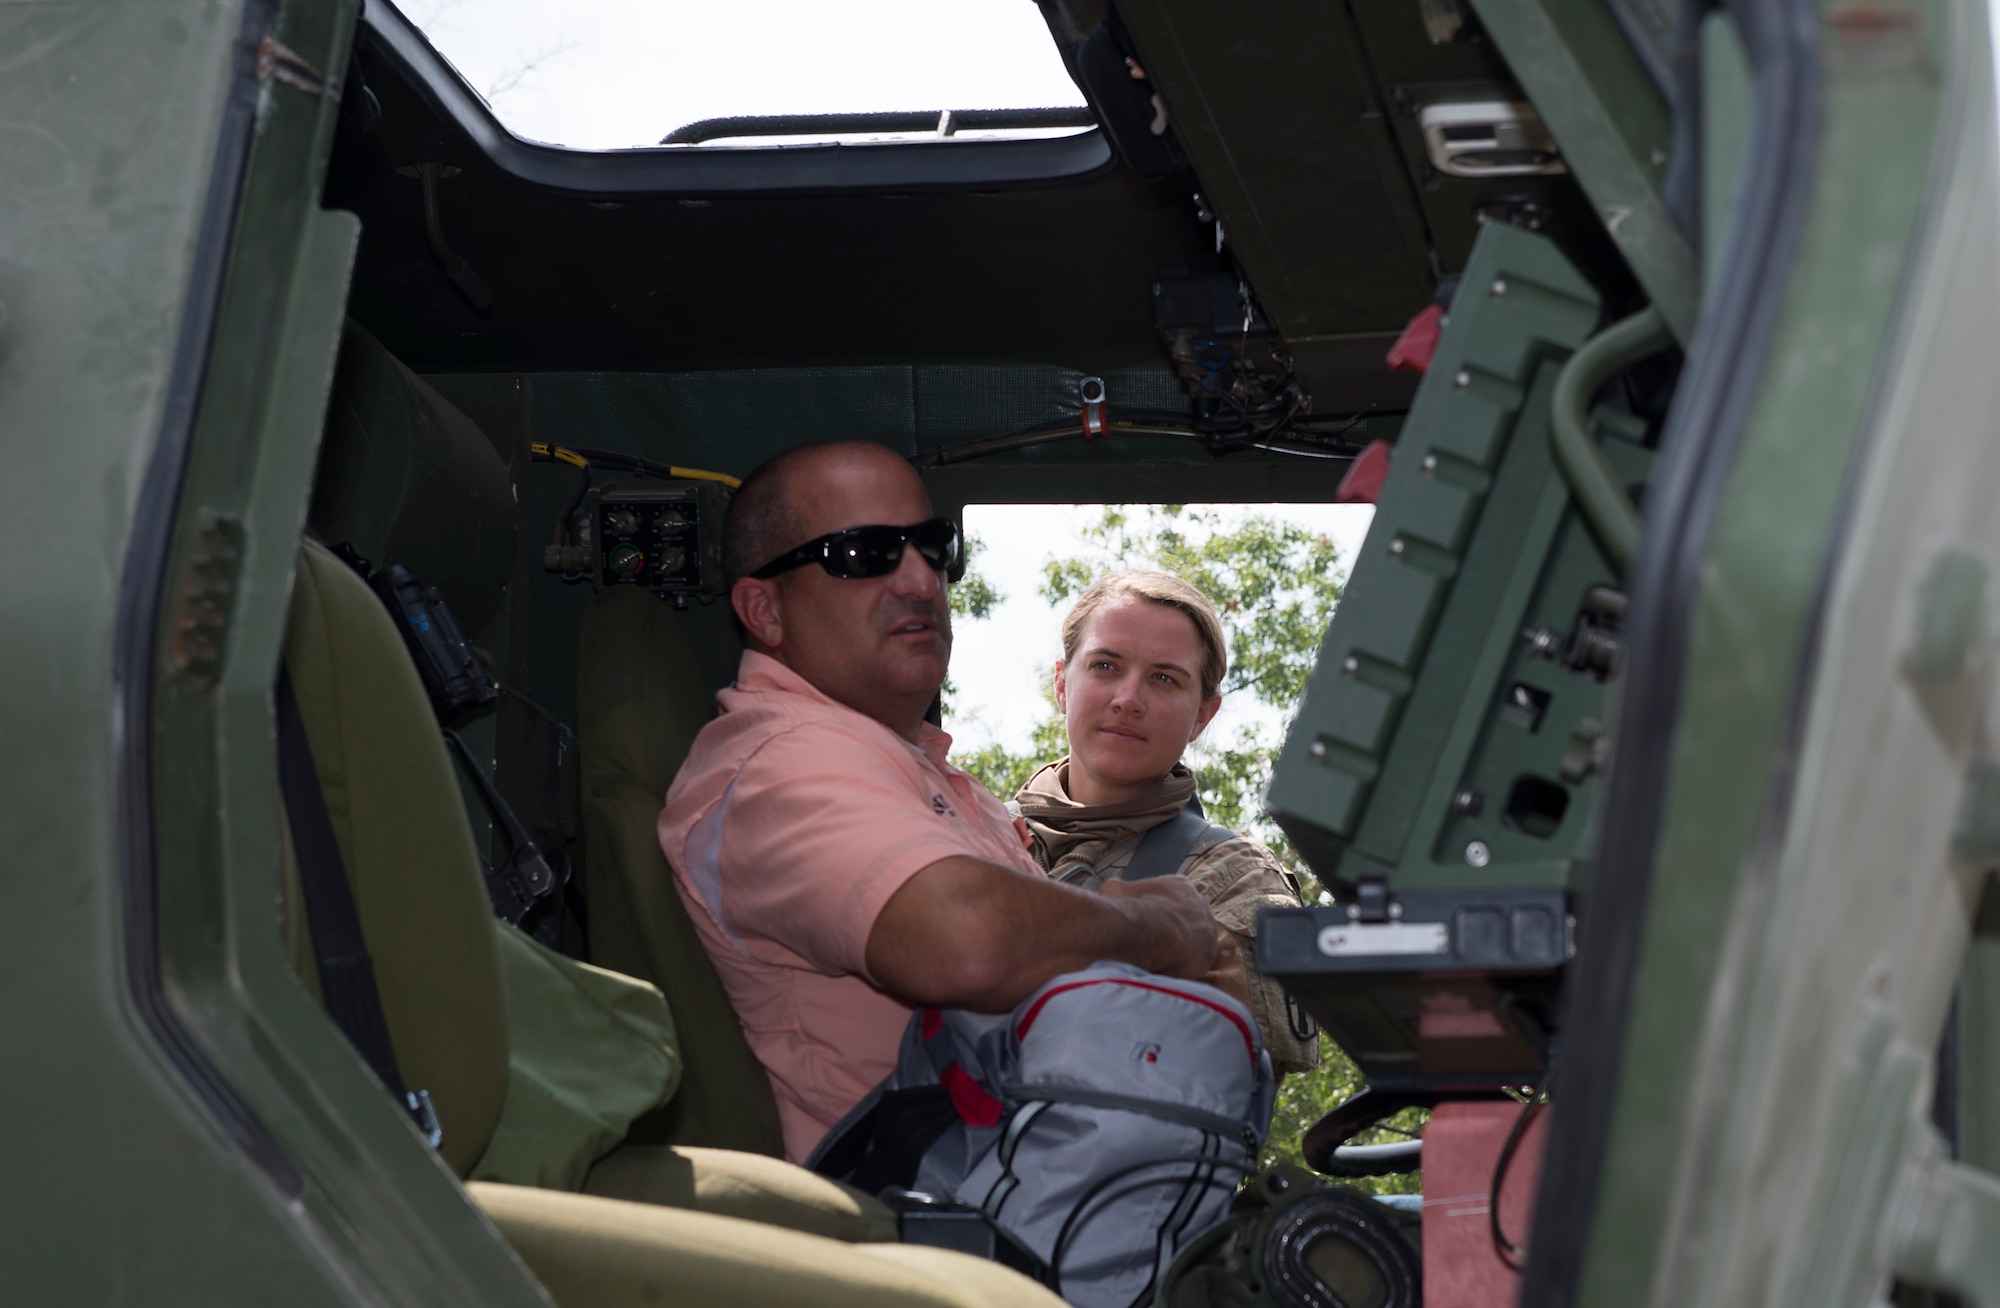 Sgt. Mackenzie C. Sickel, a HIMARS crew chief assigned to the 197th Field Artillery Brigade, N.H. Army National Guard, gives a tour of the weapon system to Jason J. LaVoie, the chief of the Hudson Police Department, on Aug. 14, 2018 at Camp Grayling, Mich. Lavoie visited as part of a N.H. Employer Support of the Guard and Reserve tour during the 197th FAB annual training event. (Photo by Staff Sgt. Kayla White, 157th Air Refueling Wing Public Affairs)